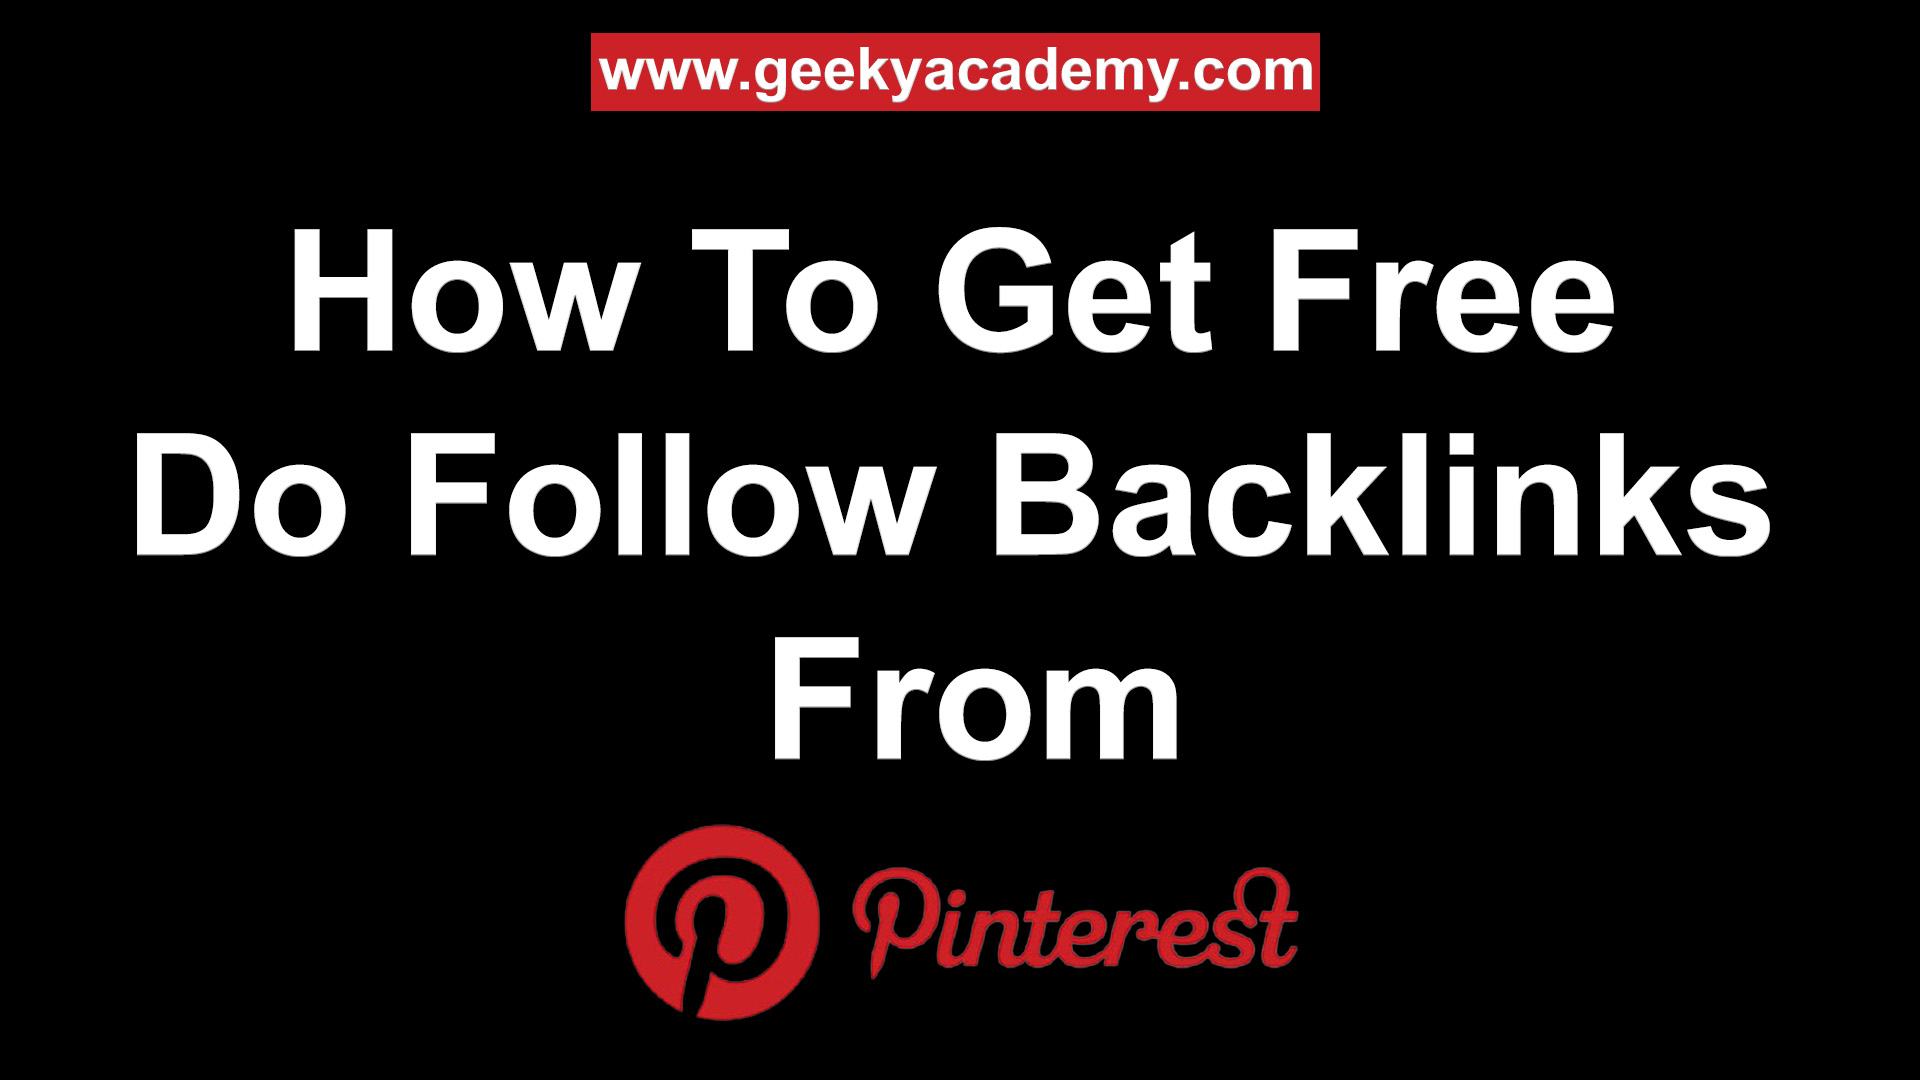 How To Get Free Do Follow Backlinks From Pinterest